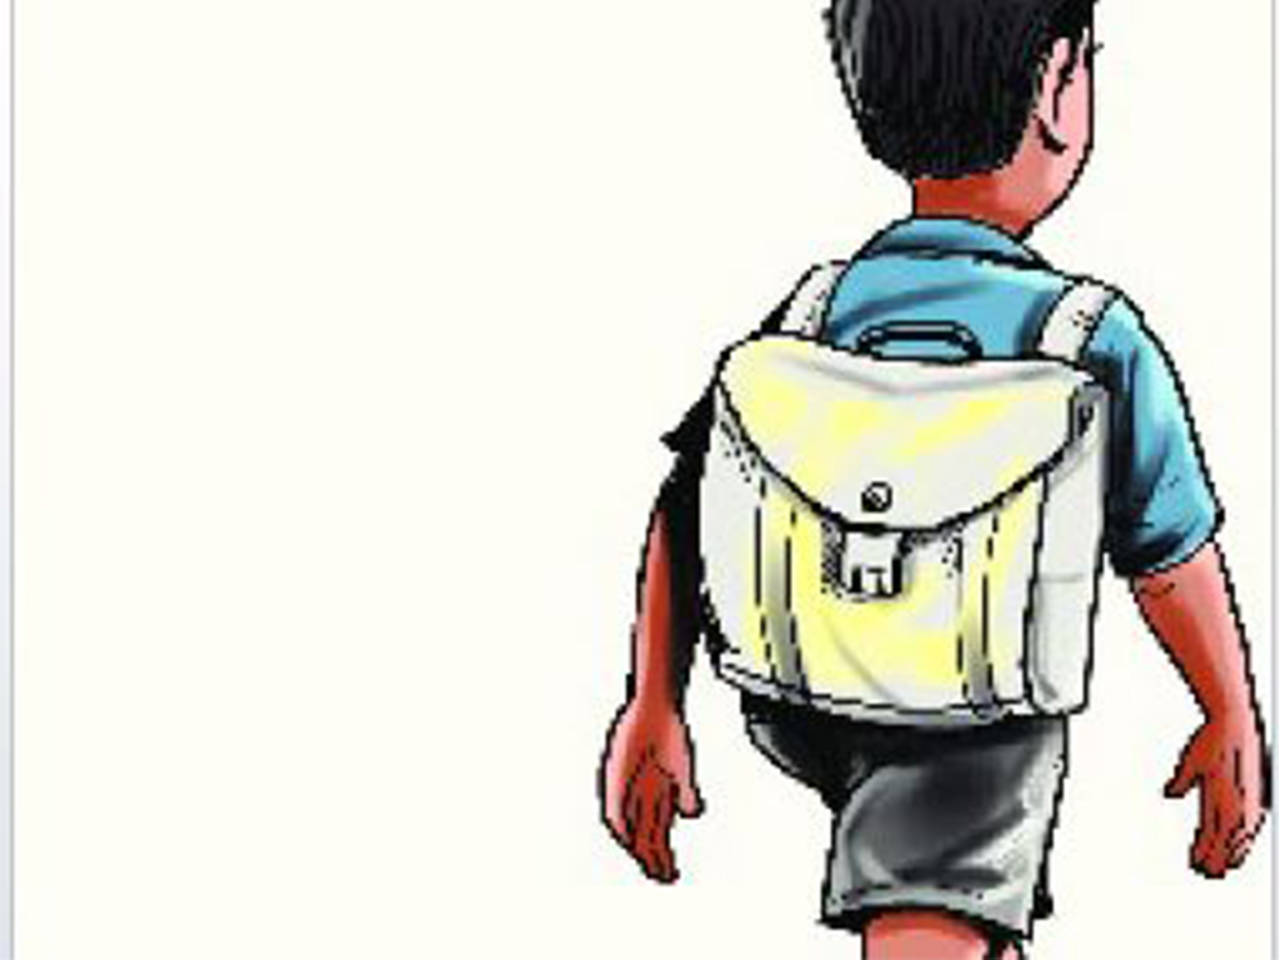 Making money matters fun for kids | Goa News - Times of India